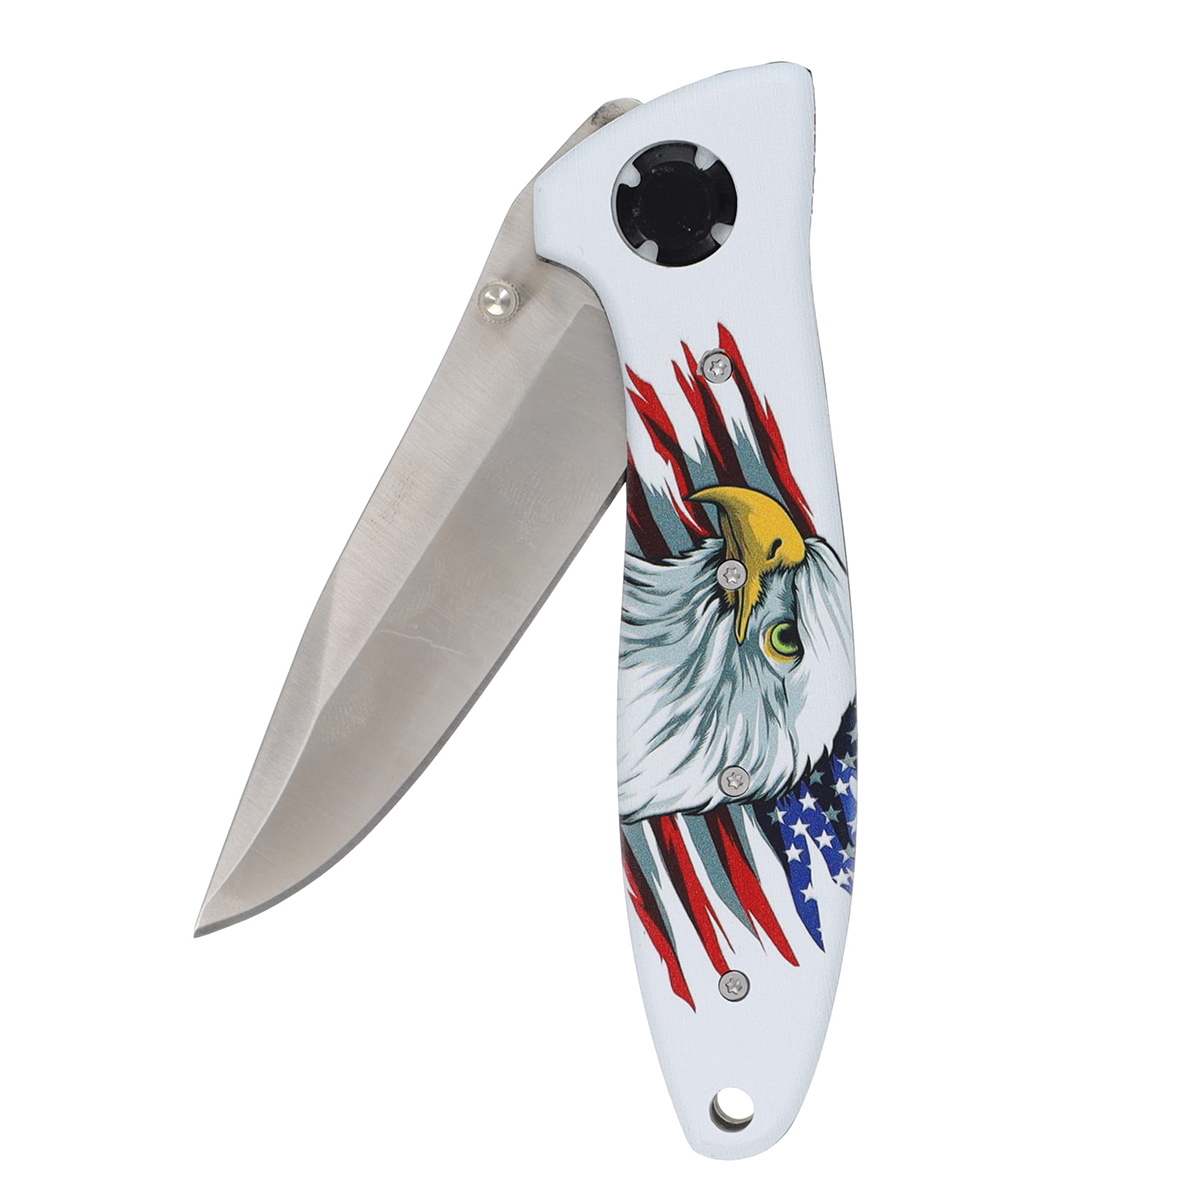 Scipio Patriotic Pocket Knife Eagle Design SCYJ1083D Folding Knife Steel 3.58 Inch Blade Tactical Knife Hunting Camping Fishing